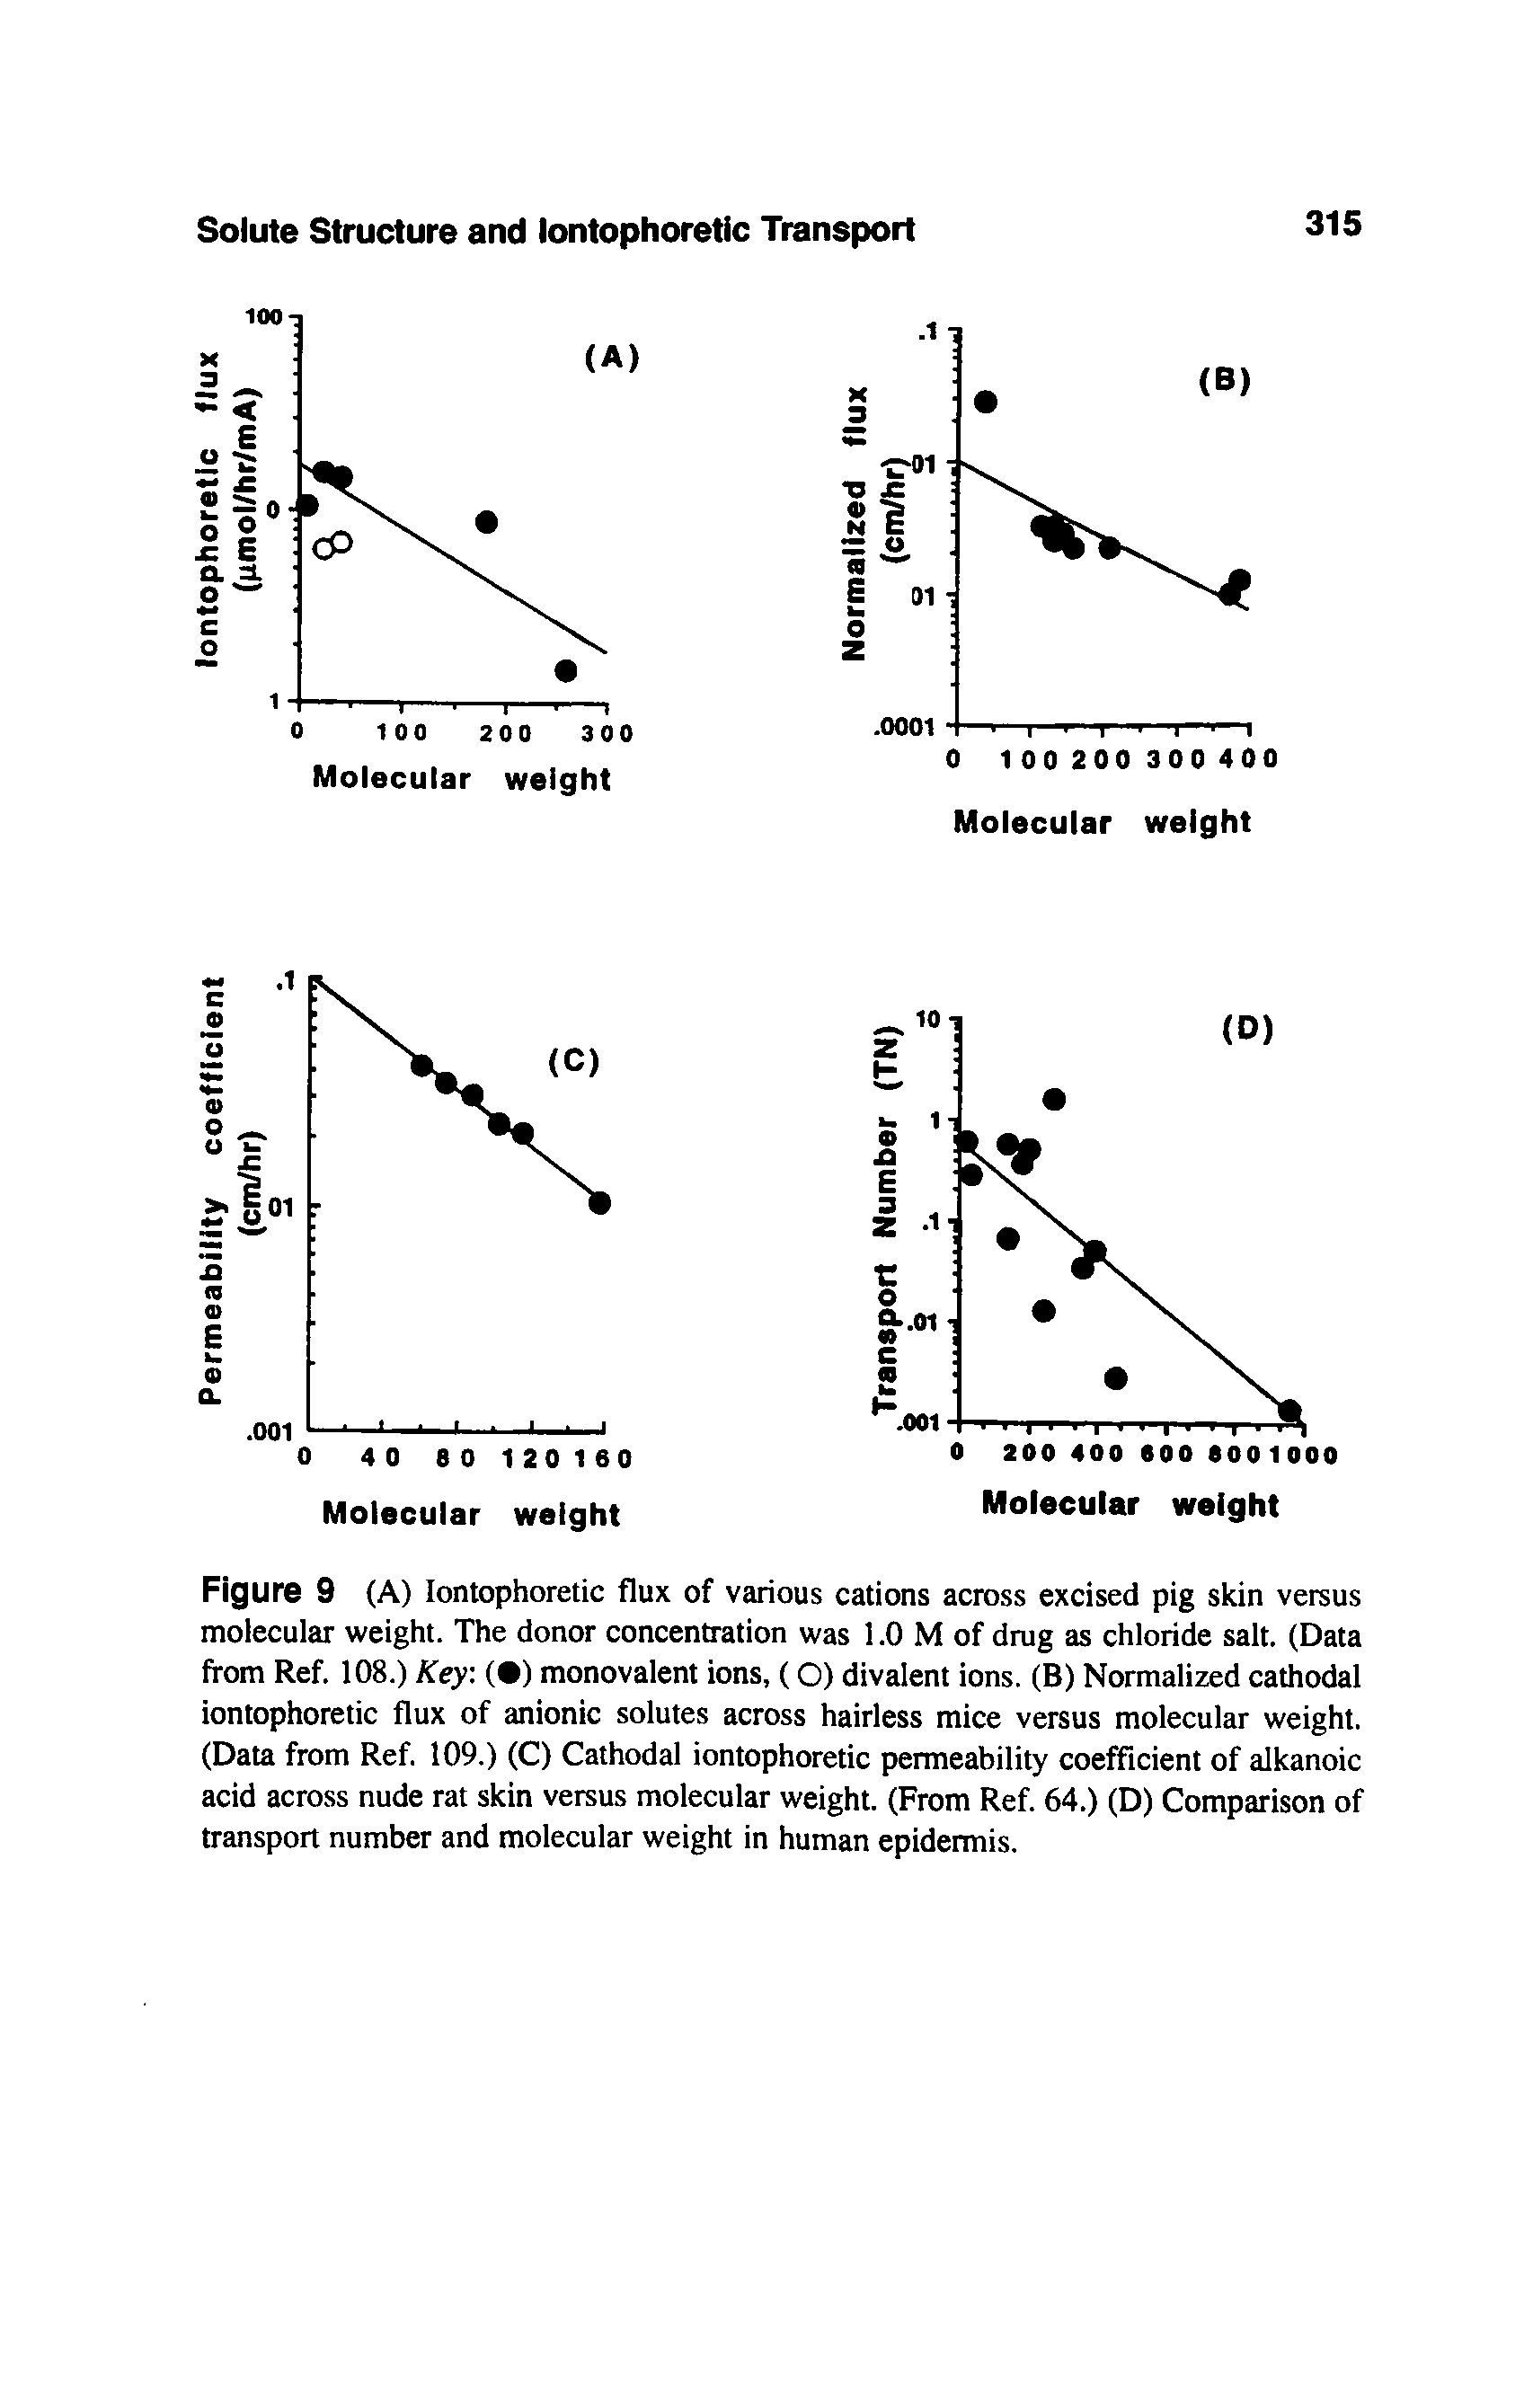 Figure 9 (A) lontophoretic flux of various cations across excised pig skin versus molecular weight. The donor concentration was 1.0 M of drug as chloride salt. (Data from Ref. 108.) Key. ( ) monovalent ions, (O) divalent ions. (B) Normalized cathodal iontophoretic flux of anionic solutes across hairless mice versus molecular weight. (Data from Ref. 109.) (C) Cathodal iontophoretic permeability coefficient of alkanoic acid across nude rat skin versus molecular weight. (From Ref. 64.) (D) Comparison of transport number and molecular weight in human epidermis.